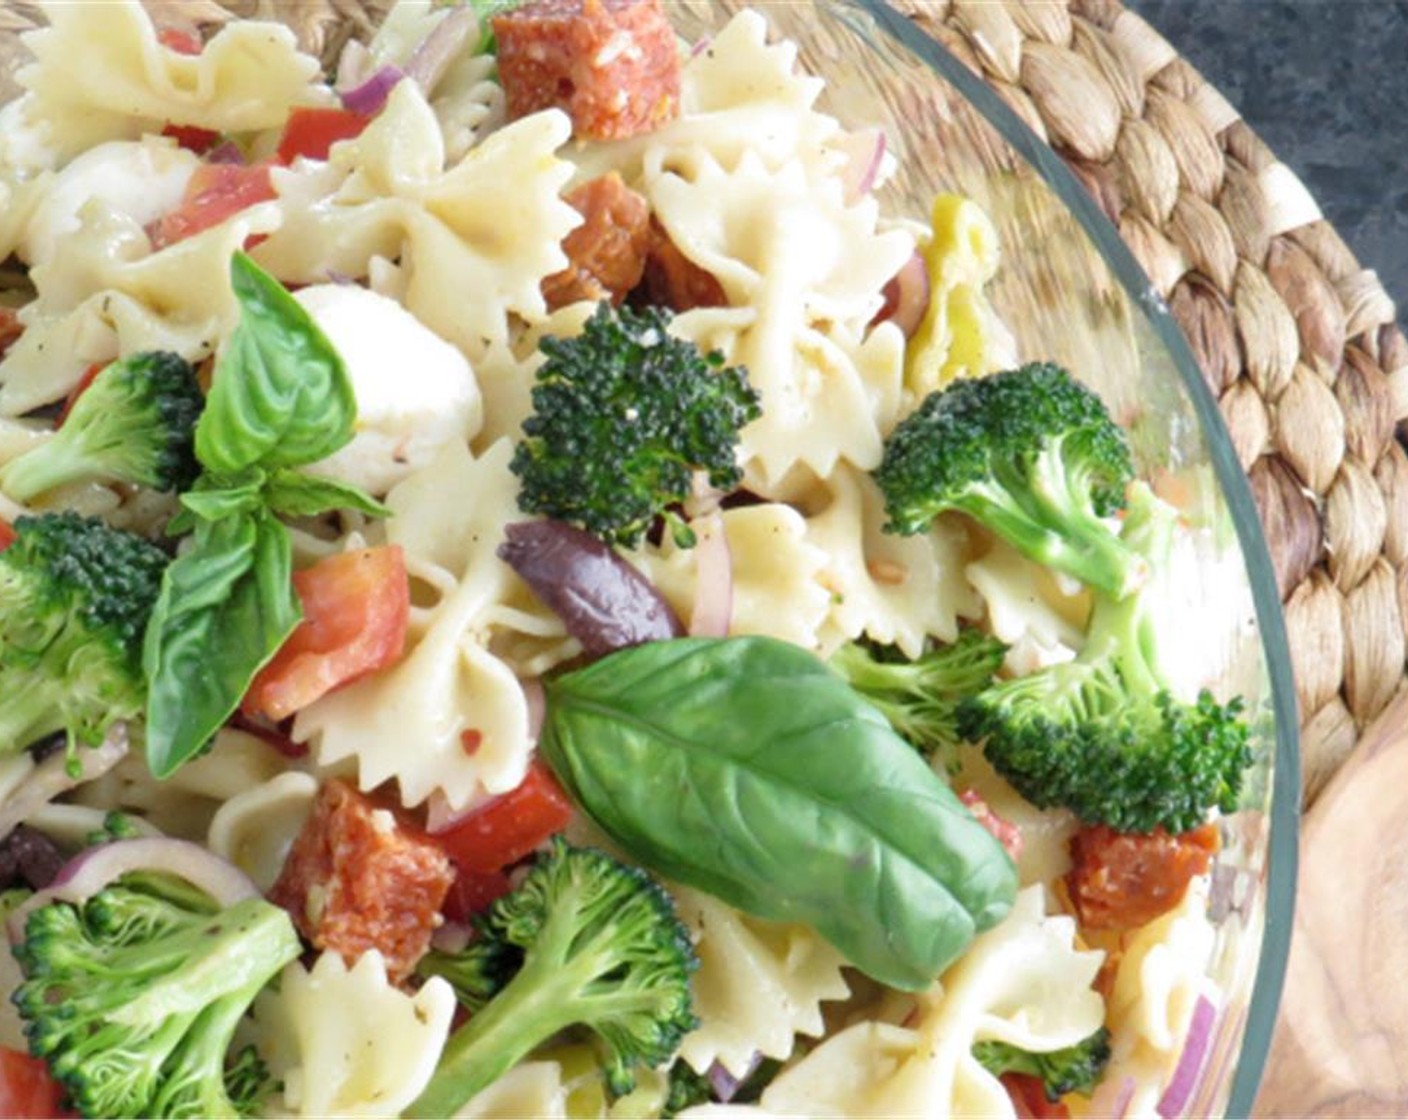 step 6 Add pasta to the vegetables. Toss to combine. Add dressing to salad and toss again. Refrigerate for several hours to allow the flavors to marry and broccoli to absorb some dressing and soften slightly. Toss with basil just before serving.